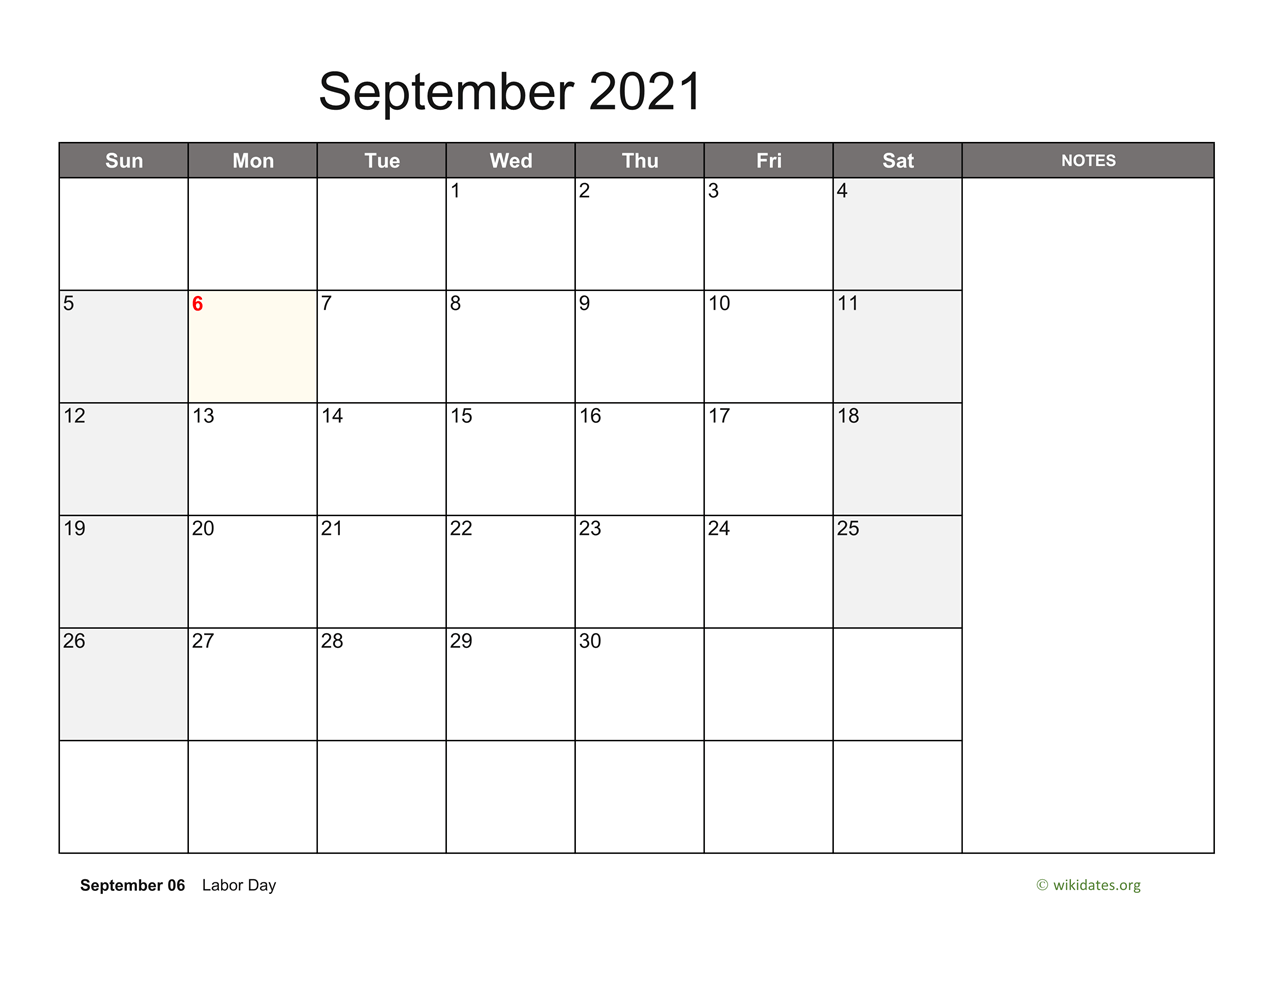 September 2021 Calendar With Notes WikiDates